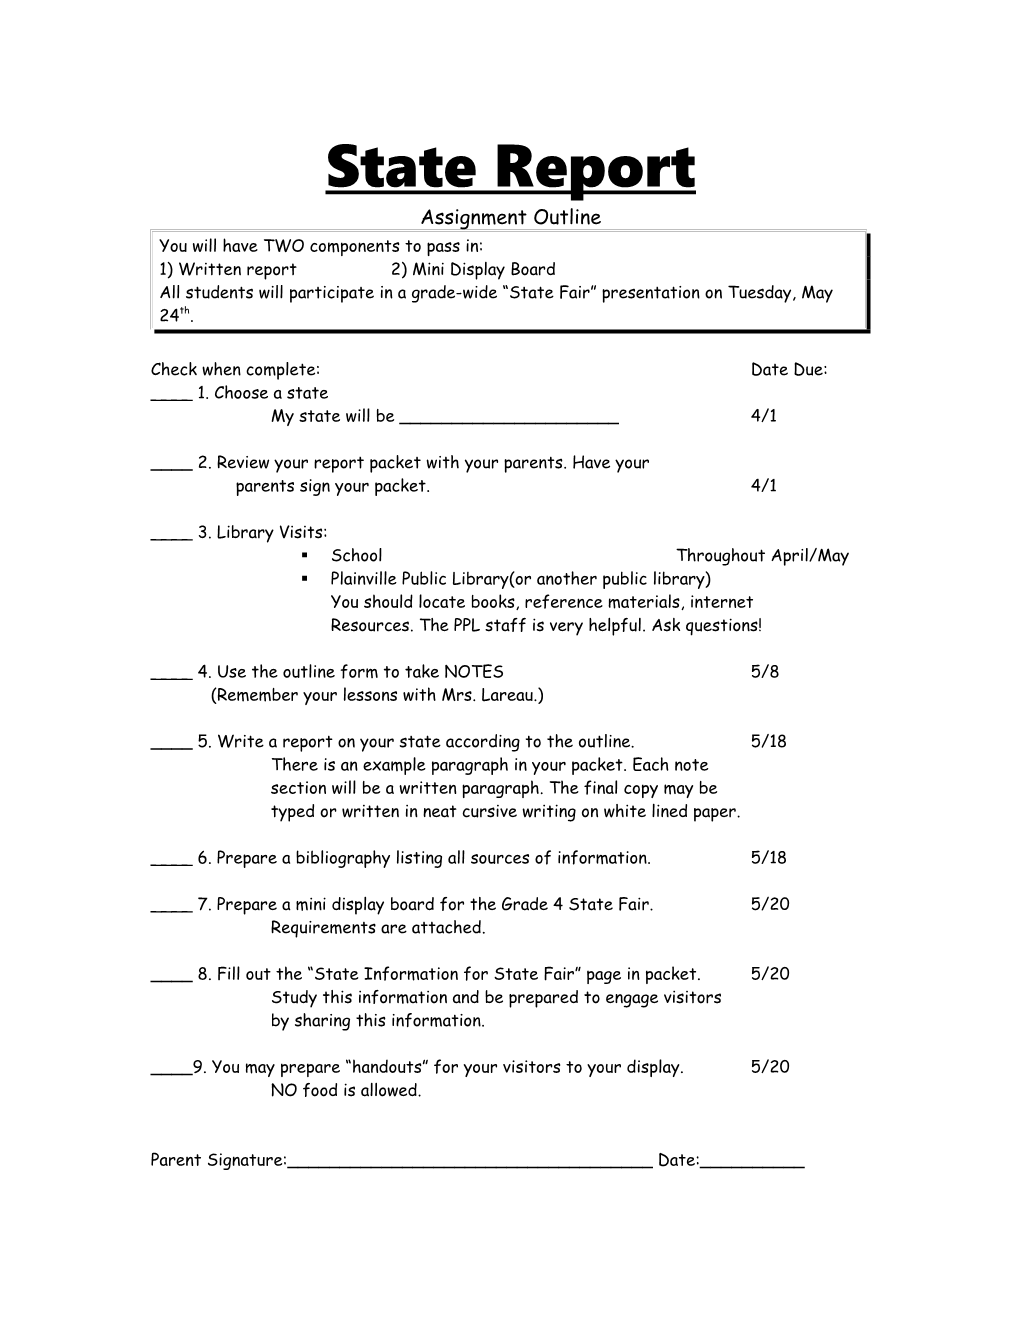 State Report Outline